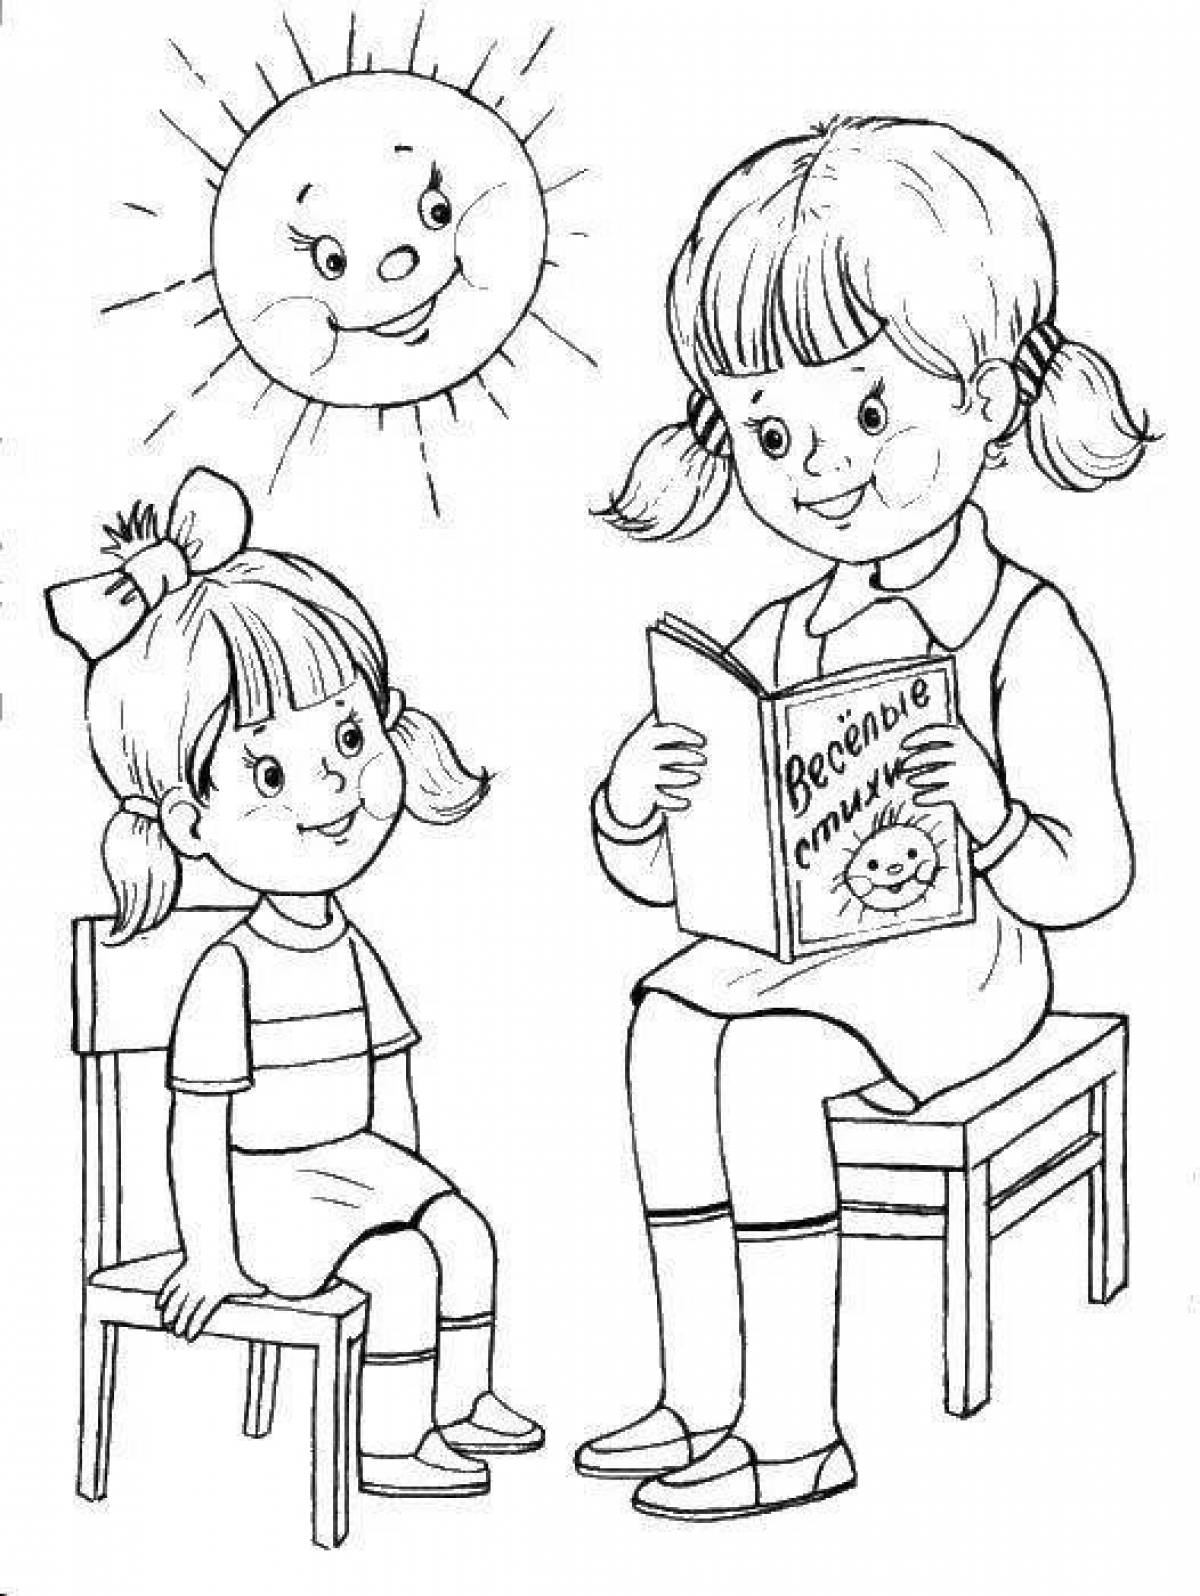 Glowing good deeds coloring page